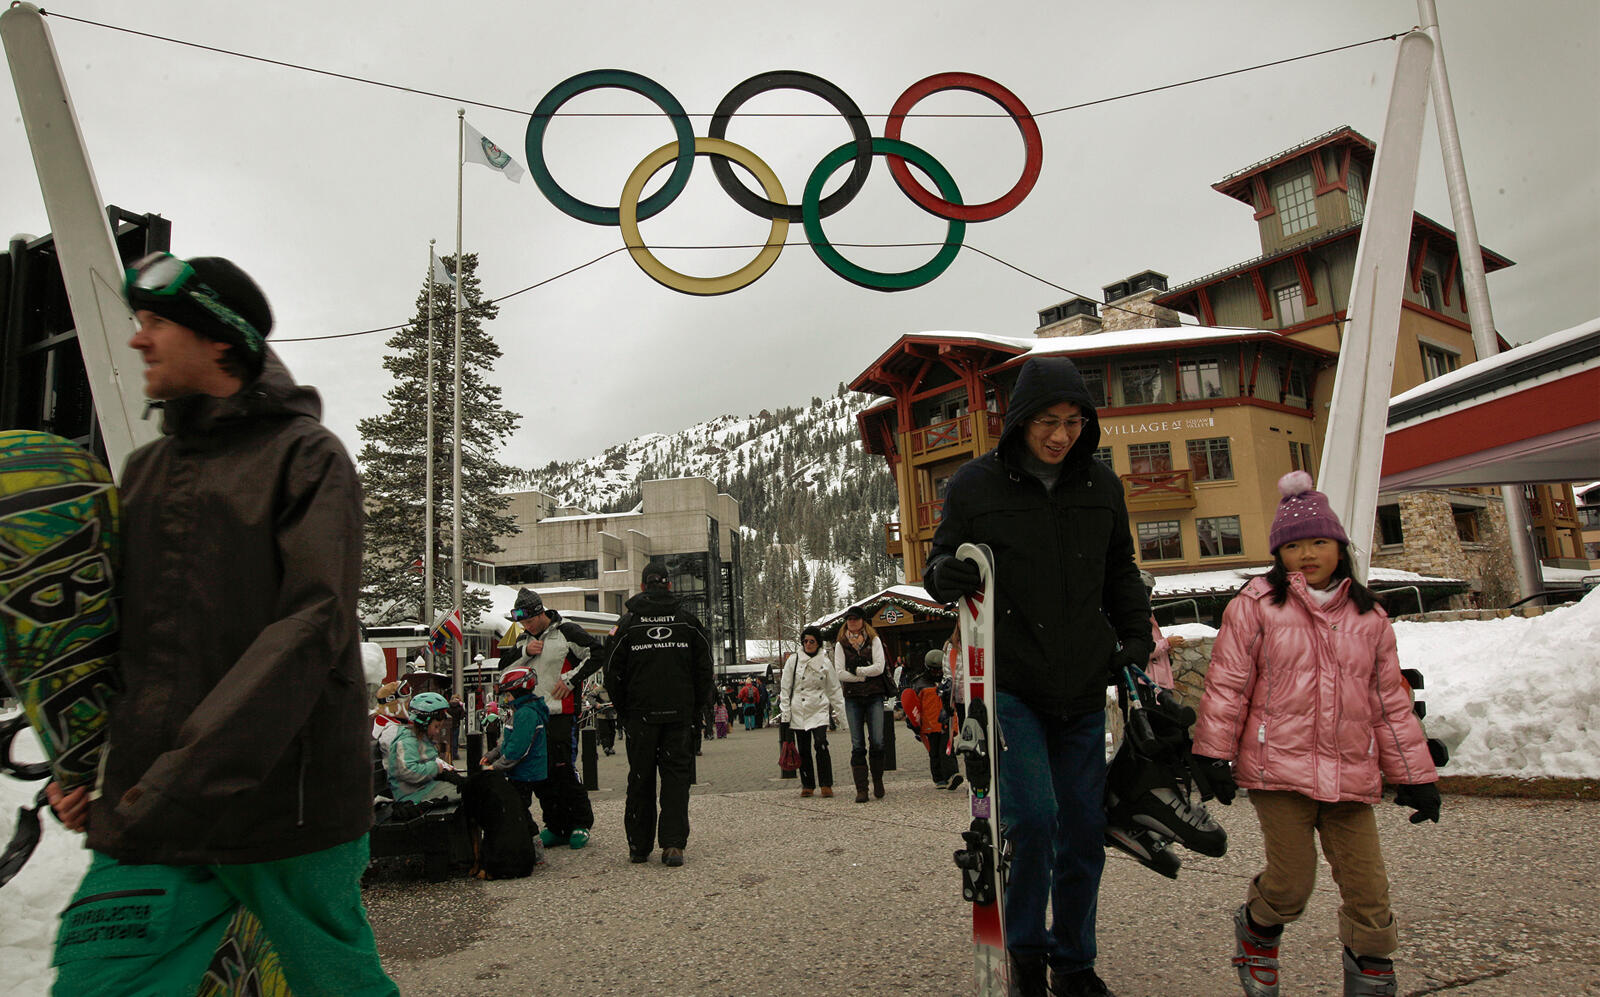 The original 1960 Winter Olympic rings in the Squaw Valley Ski Resort (Getty)